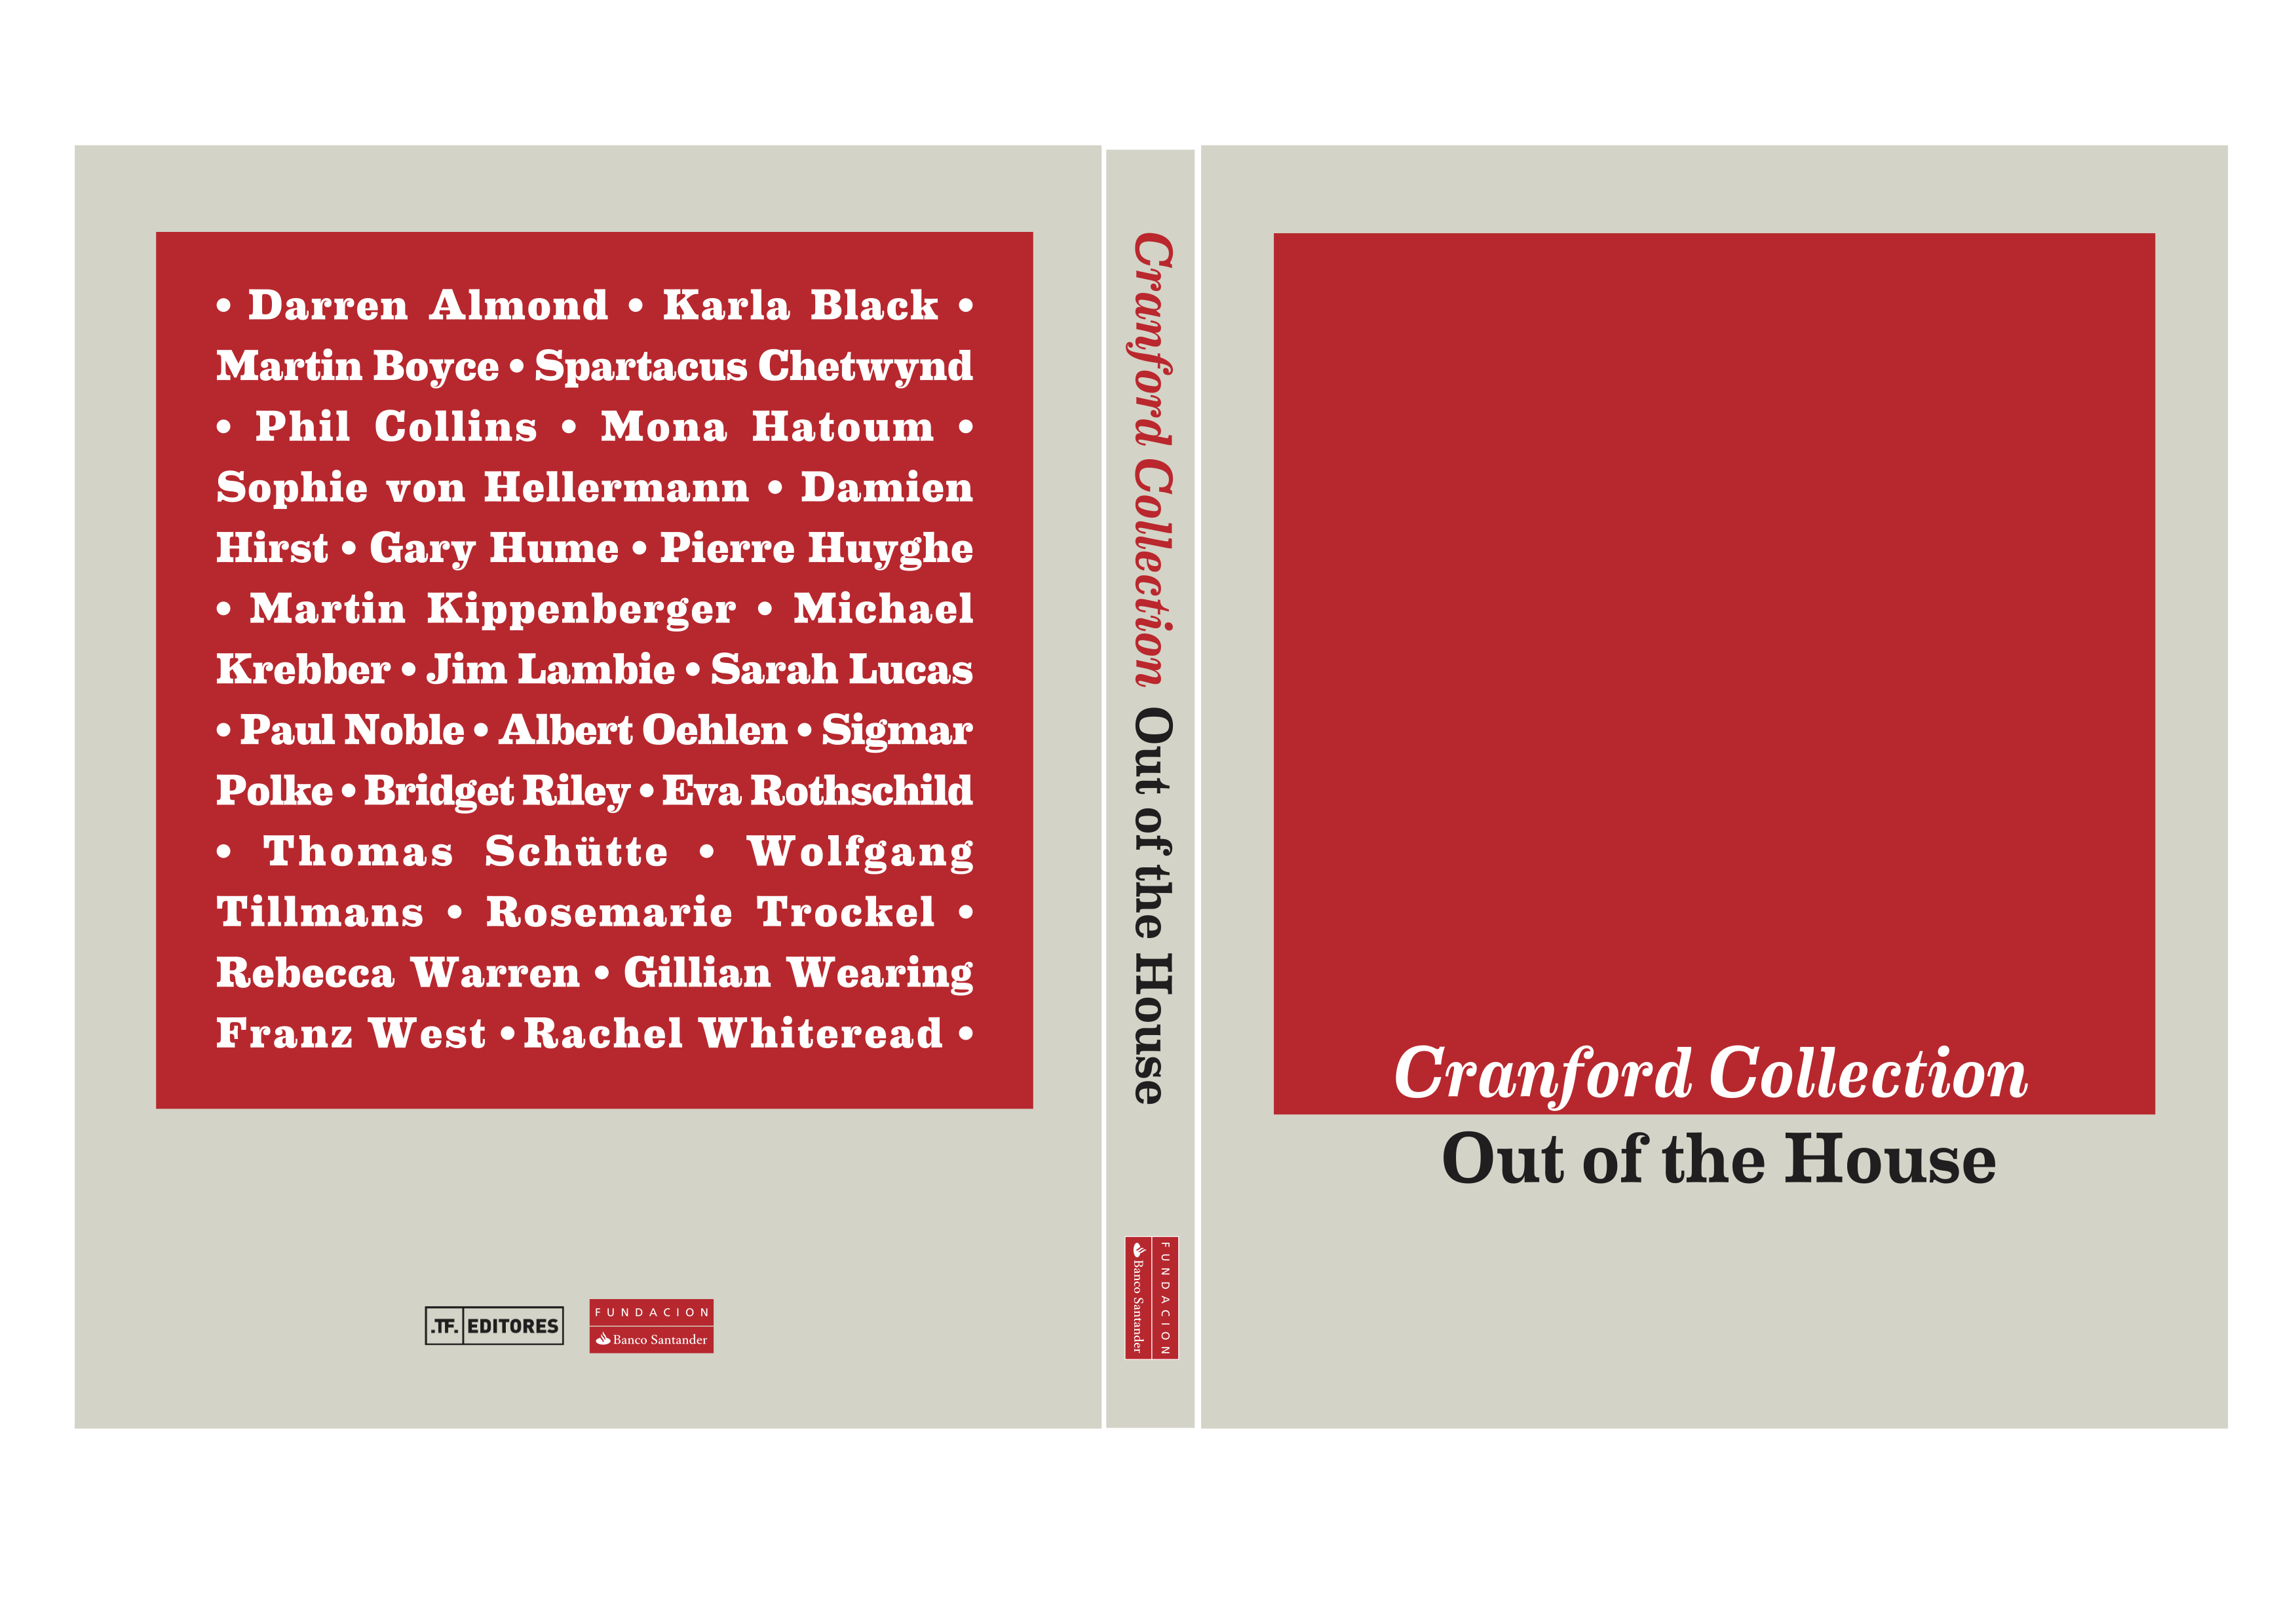 Anne Pontégnie, “Out of the House,” in: "Cranford Collection. Out of the House". Madrid/London: Fundacion Banco Santander/Cranford Collection, 2013, p.12-13.